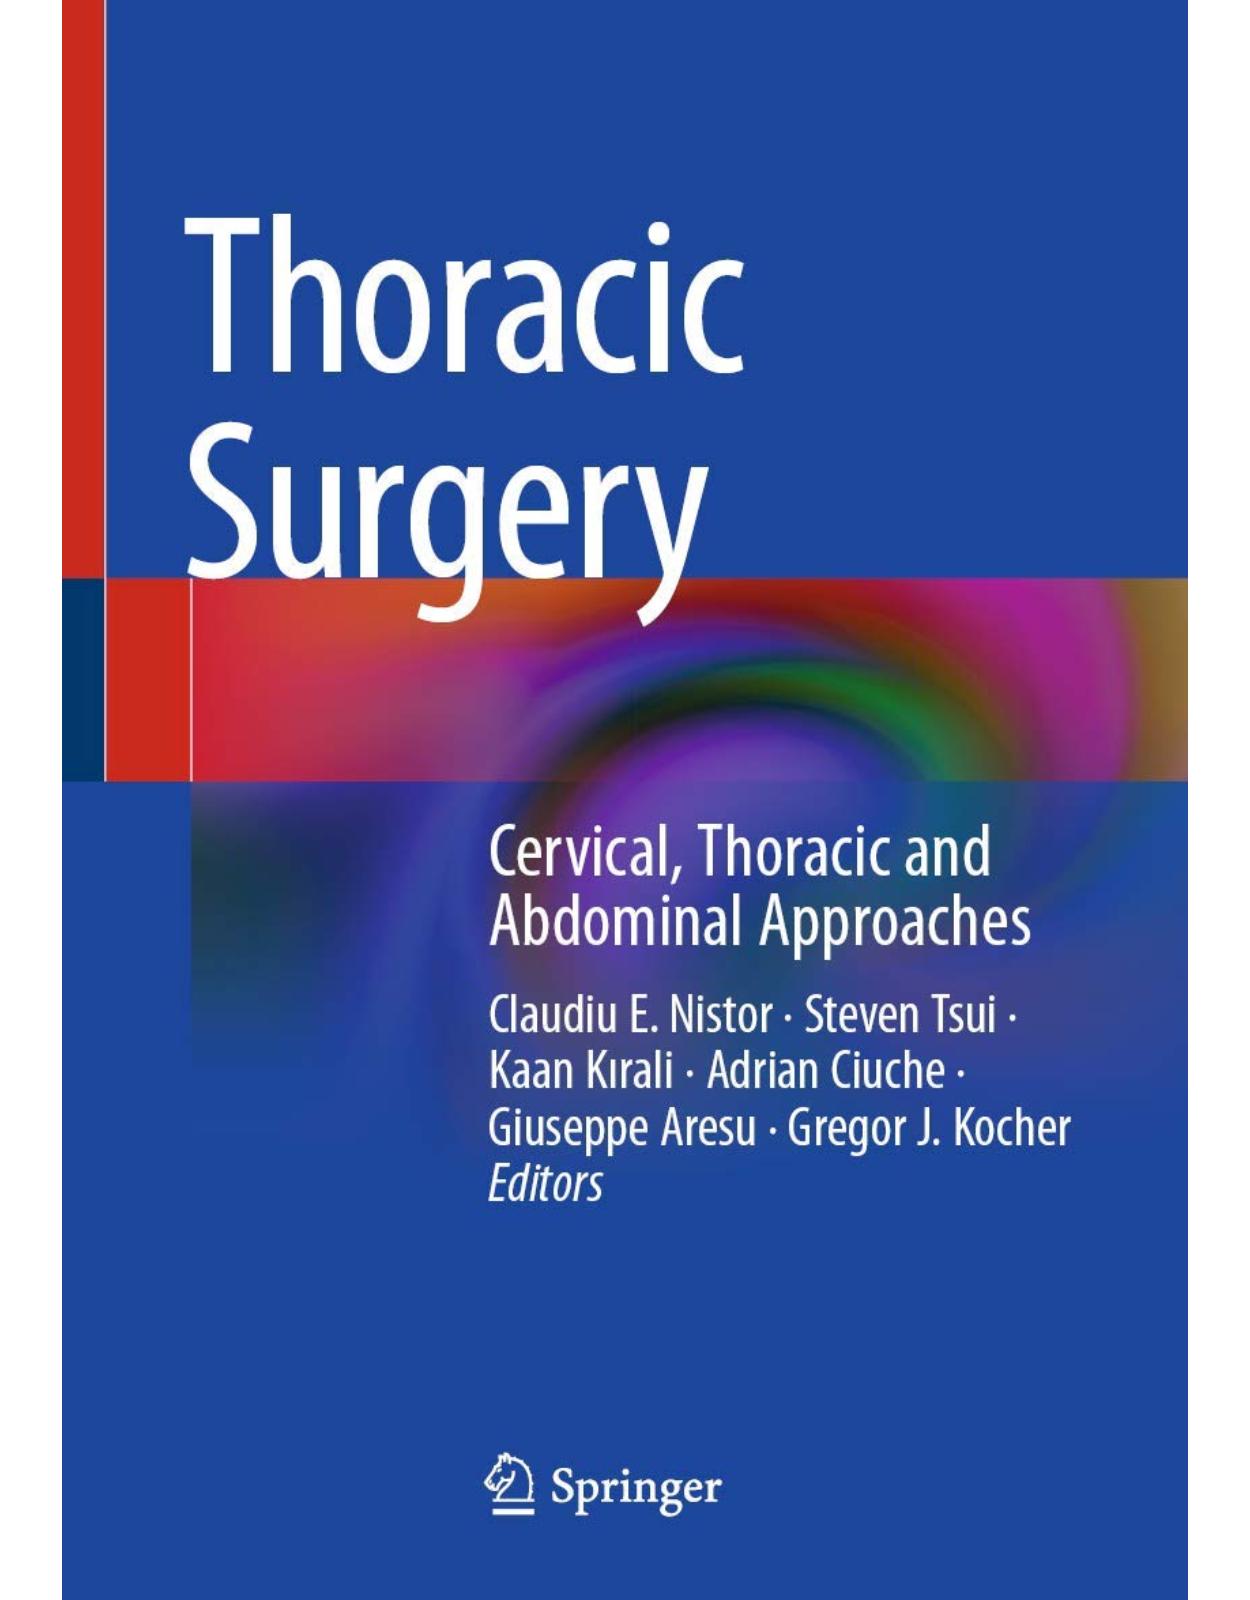 Thoracic Surgery: Cervical, Thoracic and Abdominal Approaches